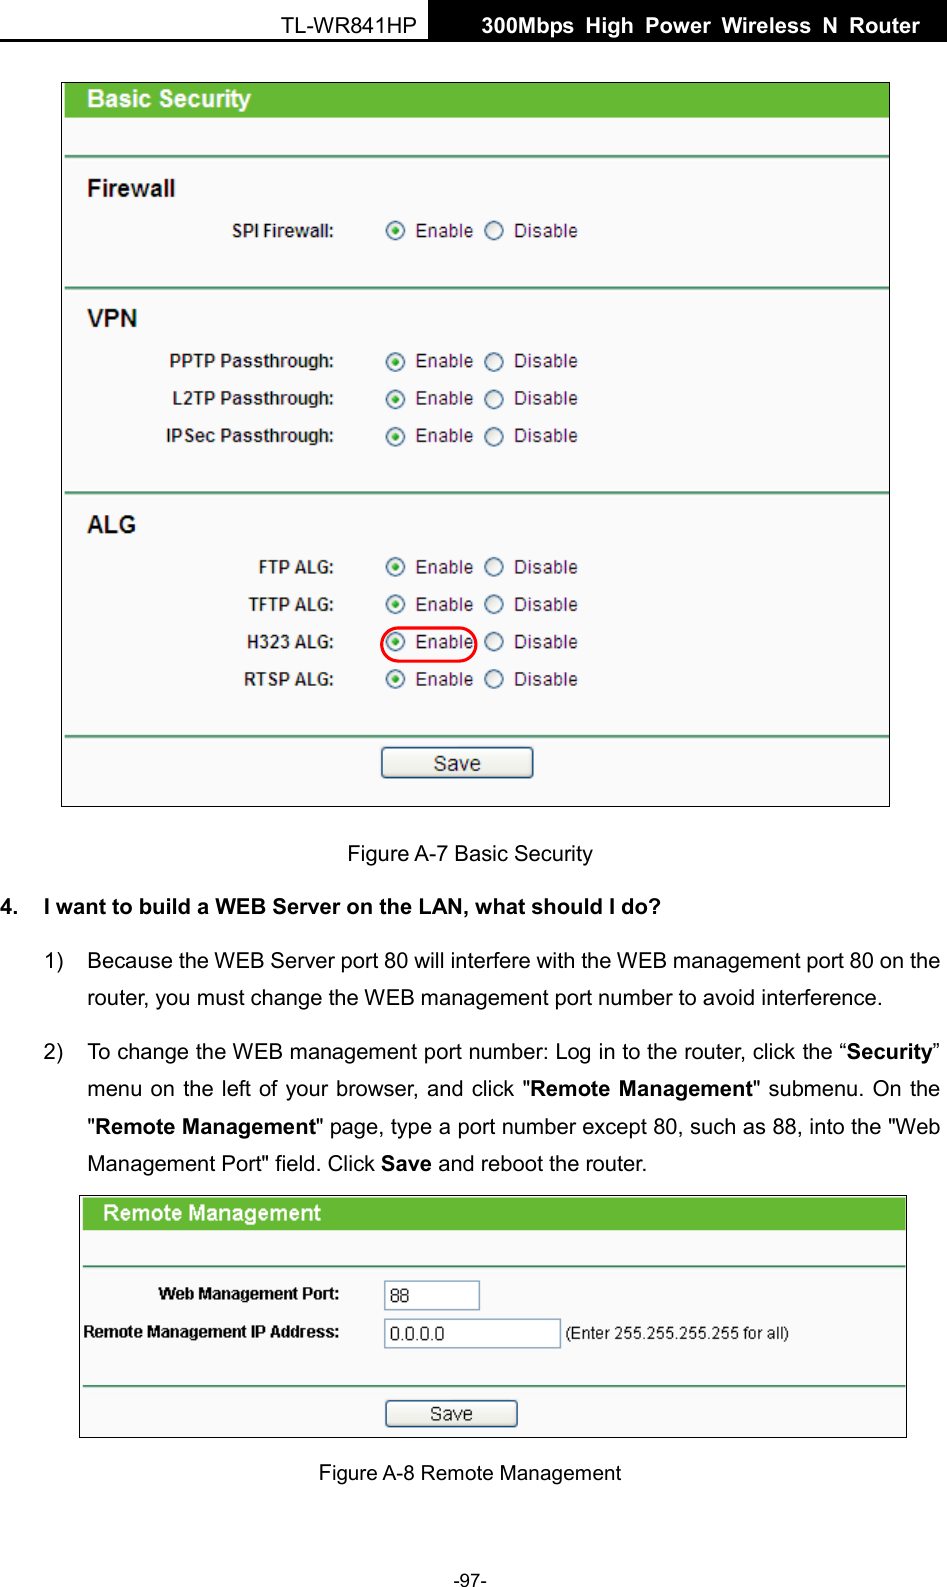  TL-WR841HP  300Mbps High Power Wireless N Router    -97-    Figure A-7 Basic Security 4. I want to build a WEB Server on the LAN, what should I do? 1) Because the WEB Server port 80 will interfere with the WEB management port 80 on the router, you must change the WEB management port number to avoid interference. 2) To change the WEB management port number: Log in to the router, click the “Security” menu on the left of your browser, and click &quot;Remote Management&quot; submenu. On the &quot;Remote Management&quot; page, type a port number except 80, such as 88, into the &quot;Web Management Port&quot; field. Click Save and reboot the router.  Figure A-8 Remote Management 